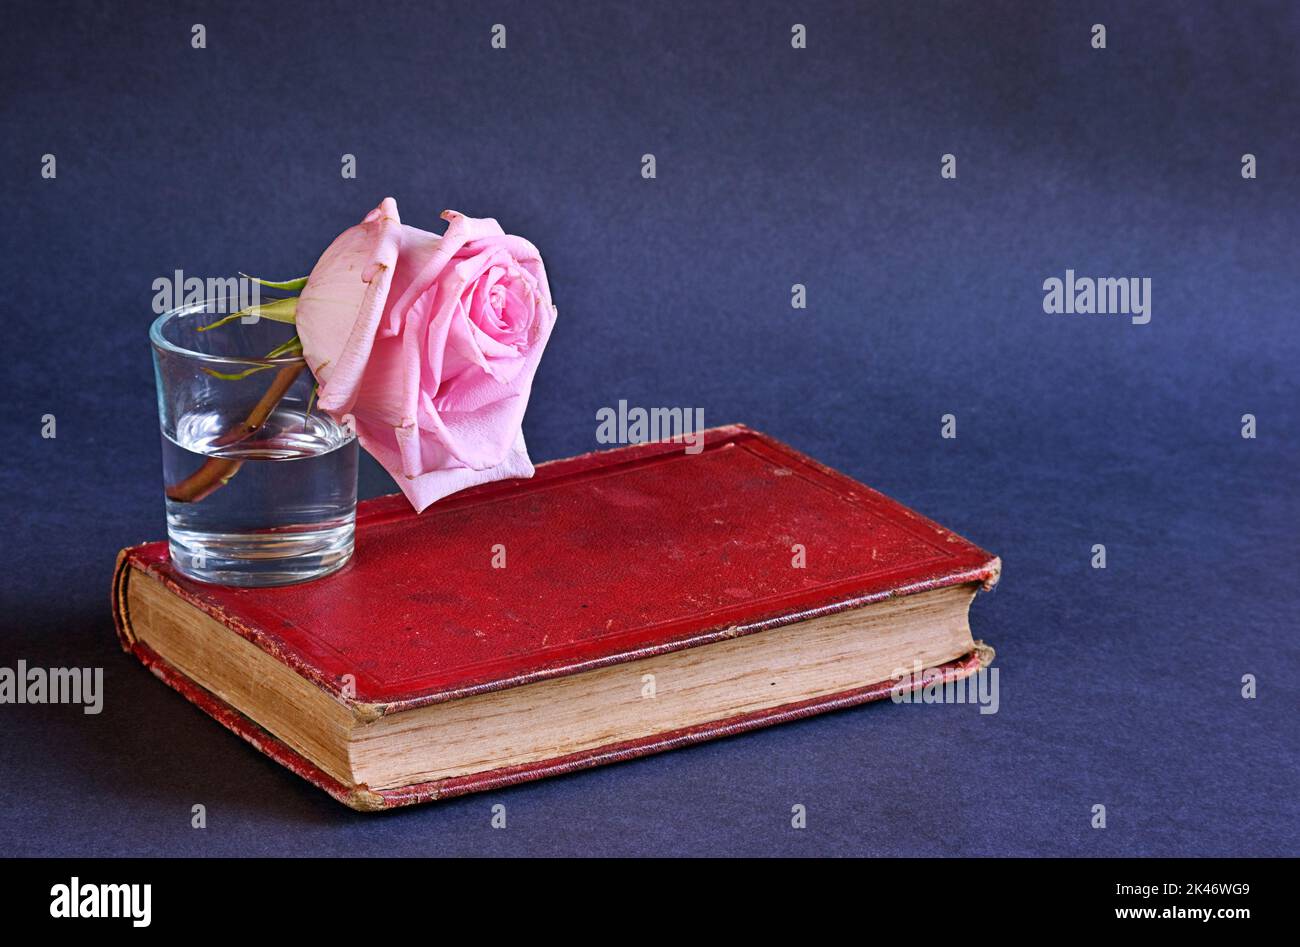 Withered rose flower with old red book. Concept photography. Stock Photo